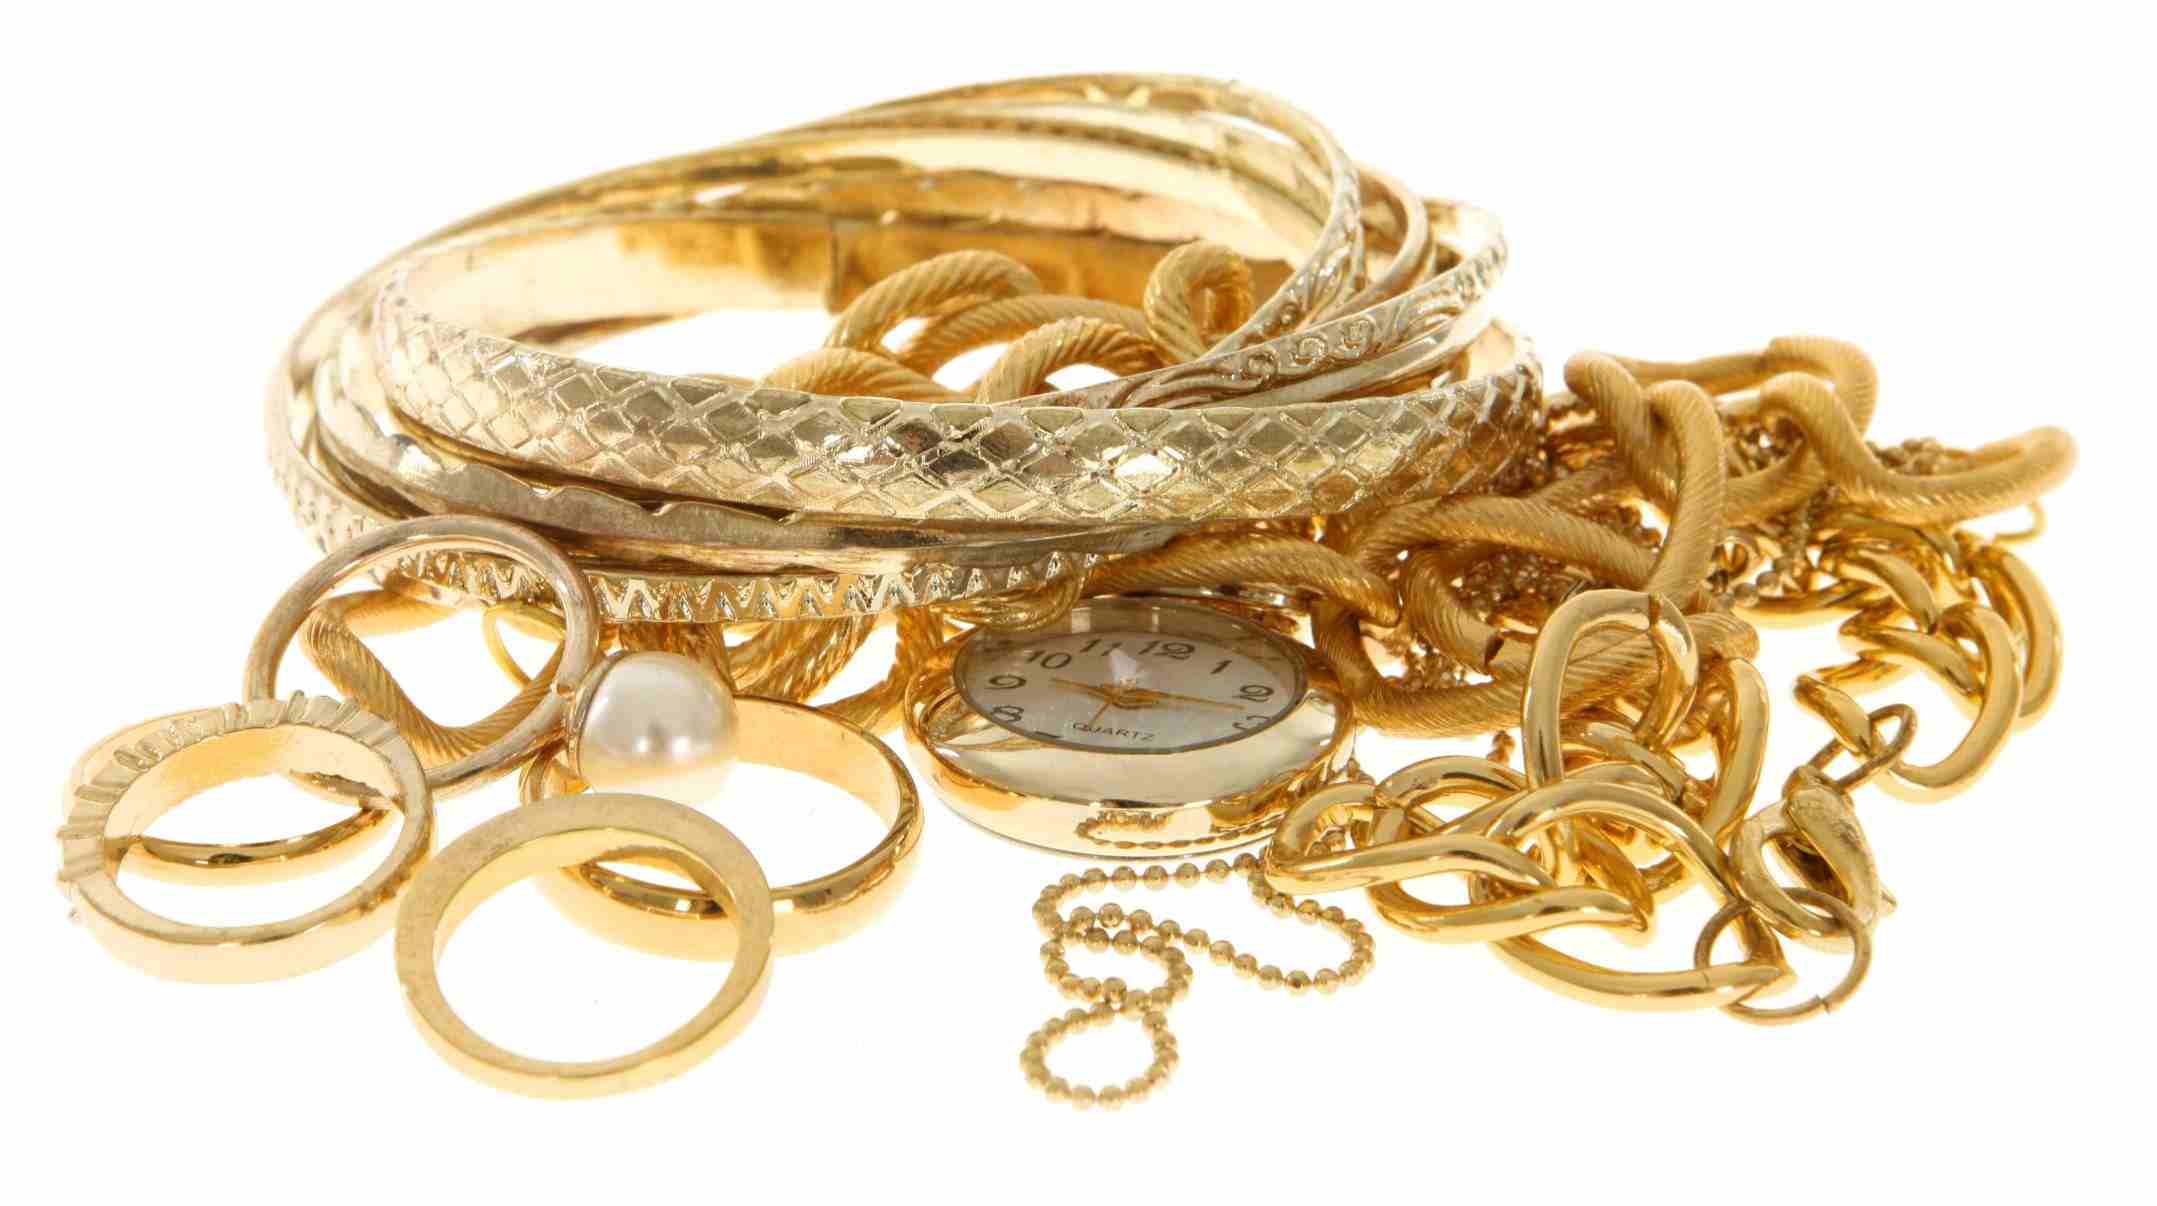 Gold Jewelry For Cash Buyers in Houston, TX